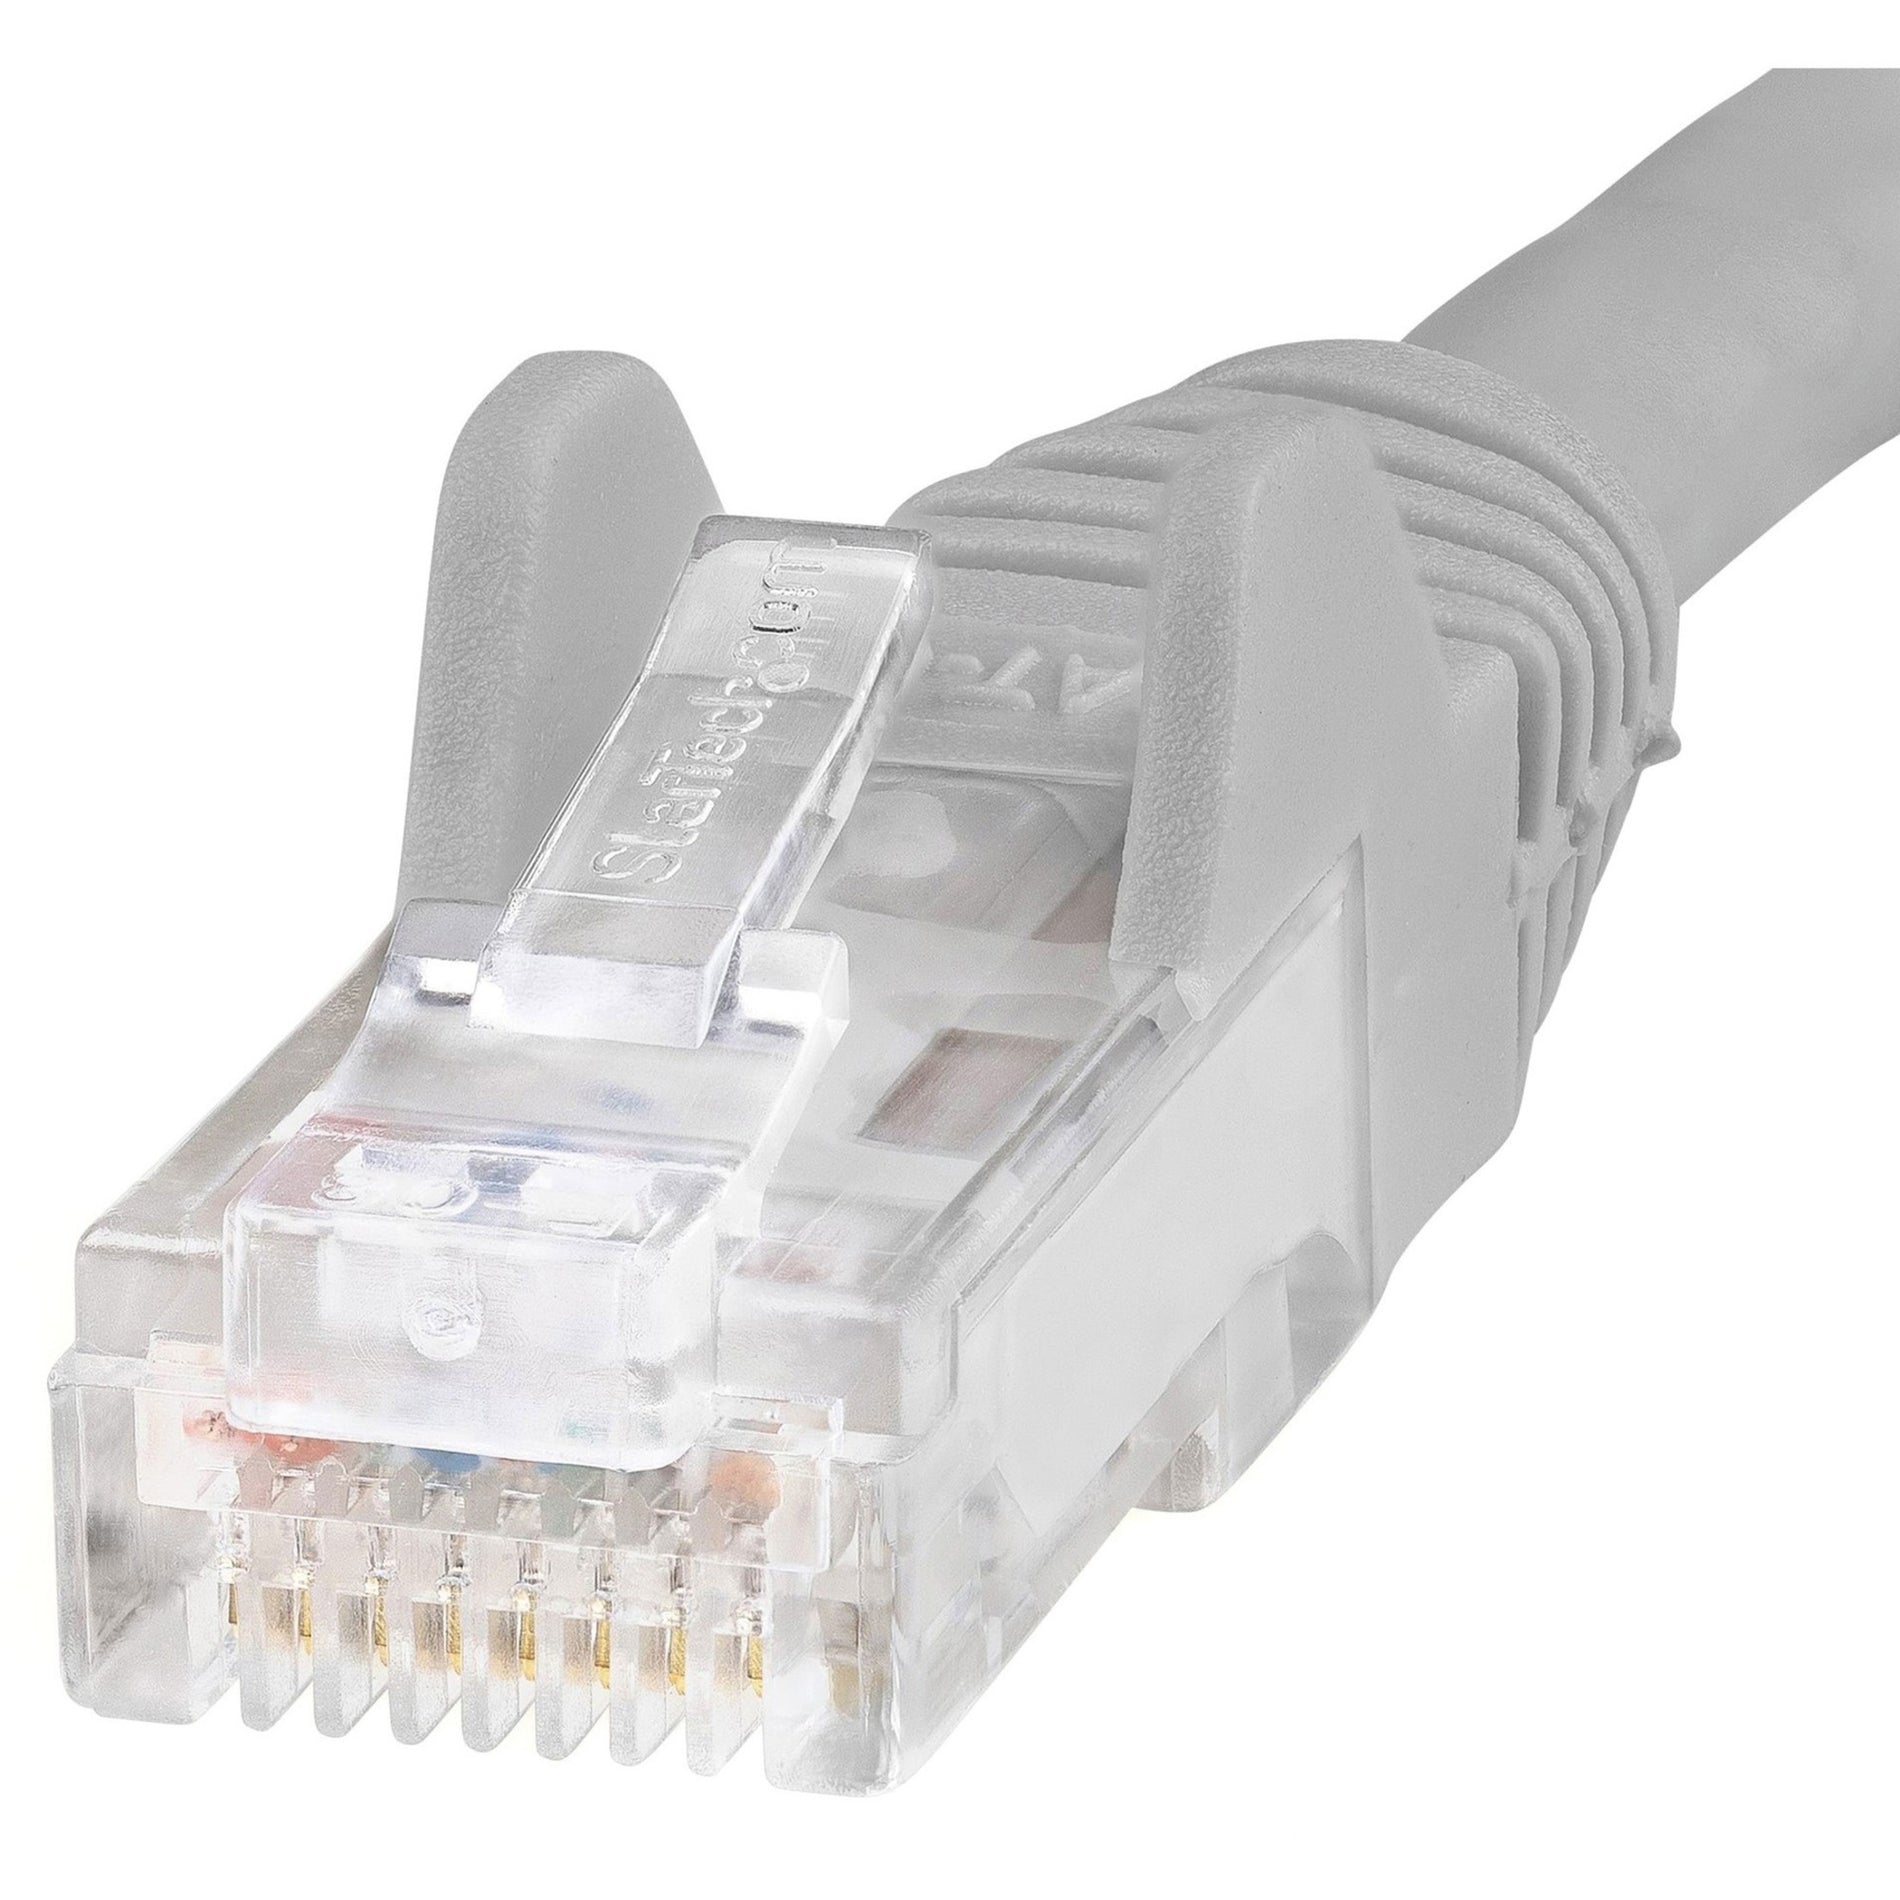 StarTech.com N6PATCH6INGR Cat6 Patch Cable, 6in Gray, Snagless RJ45 Connectors